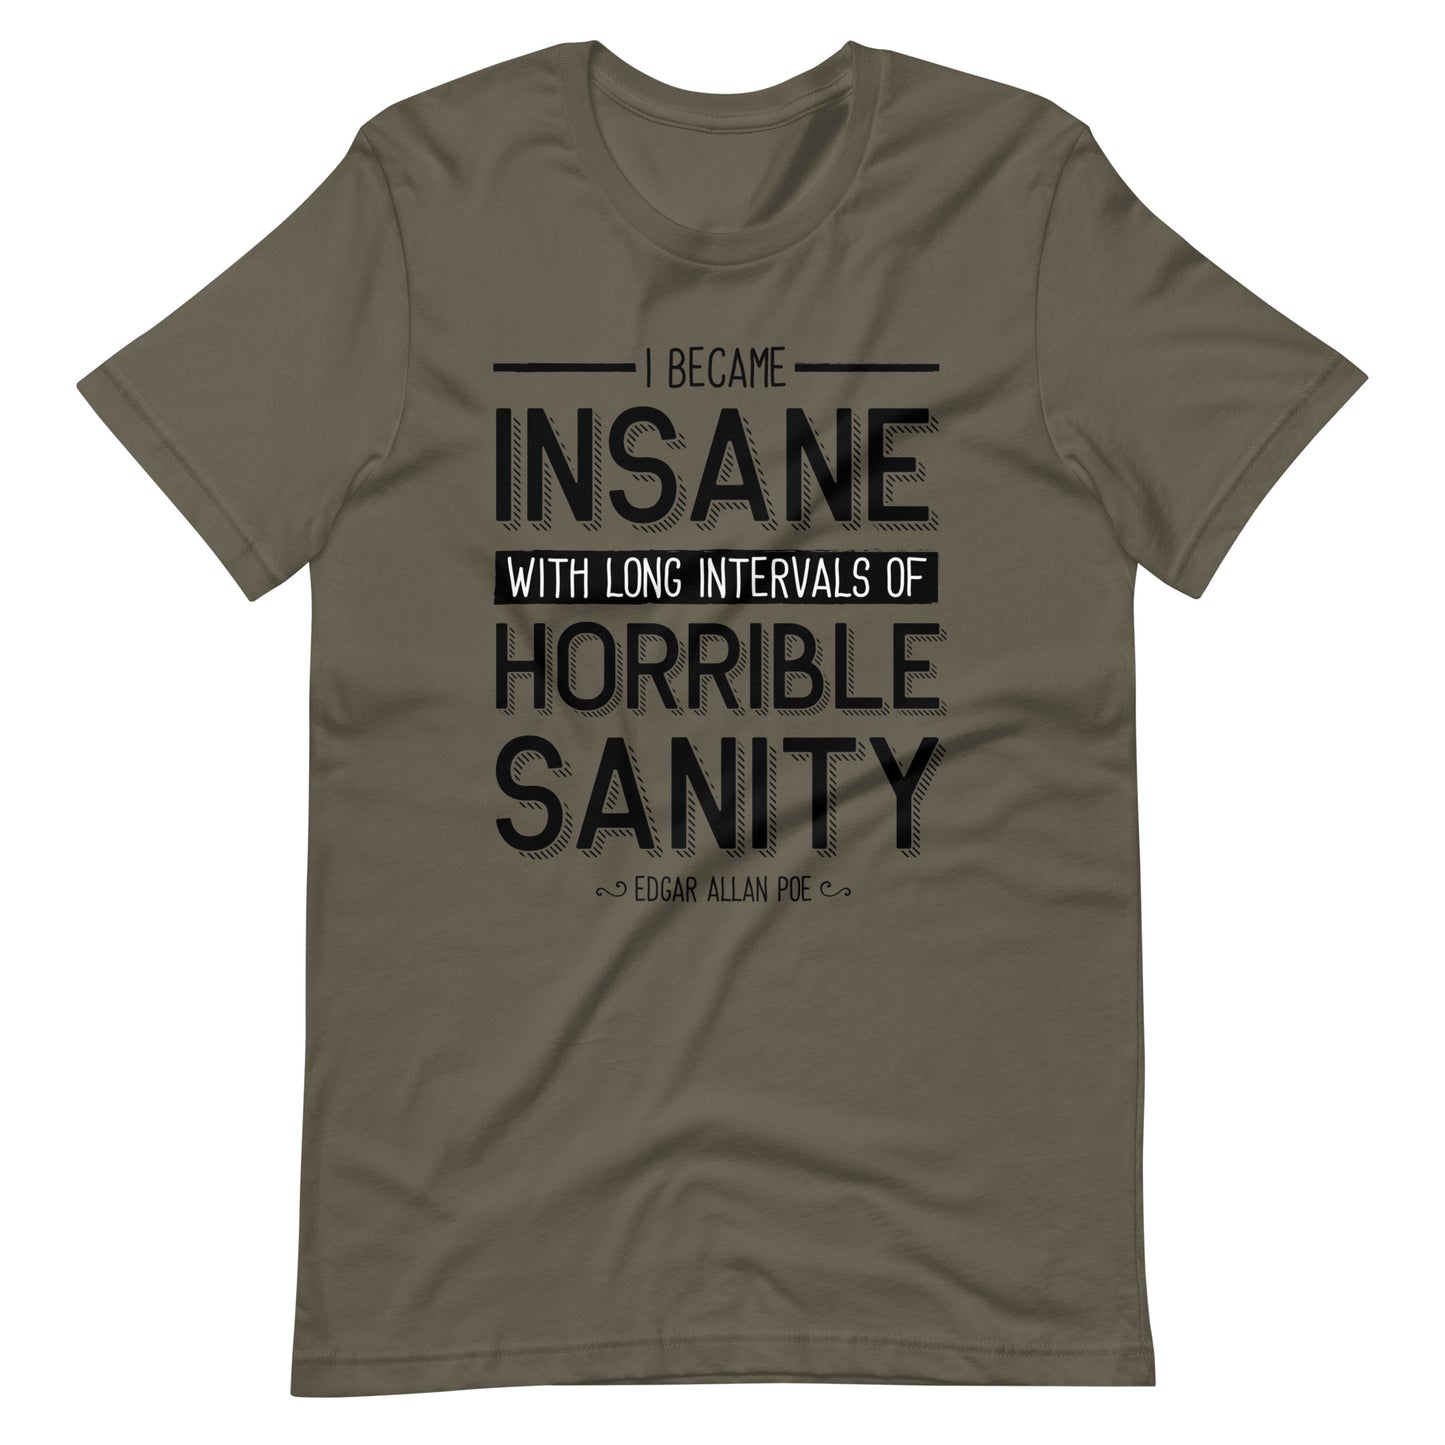 I Became Insane Edgar Allan Poe Quote - Men's t-shirt - Army Front